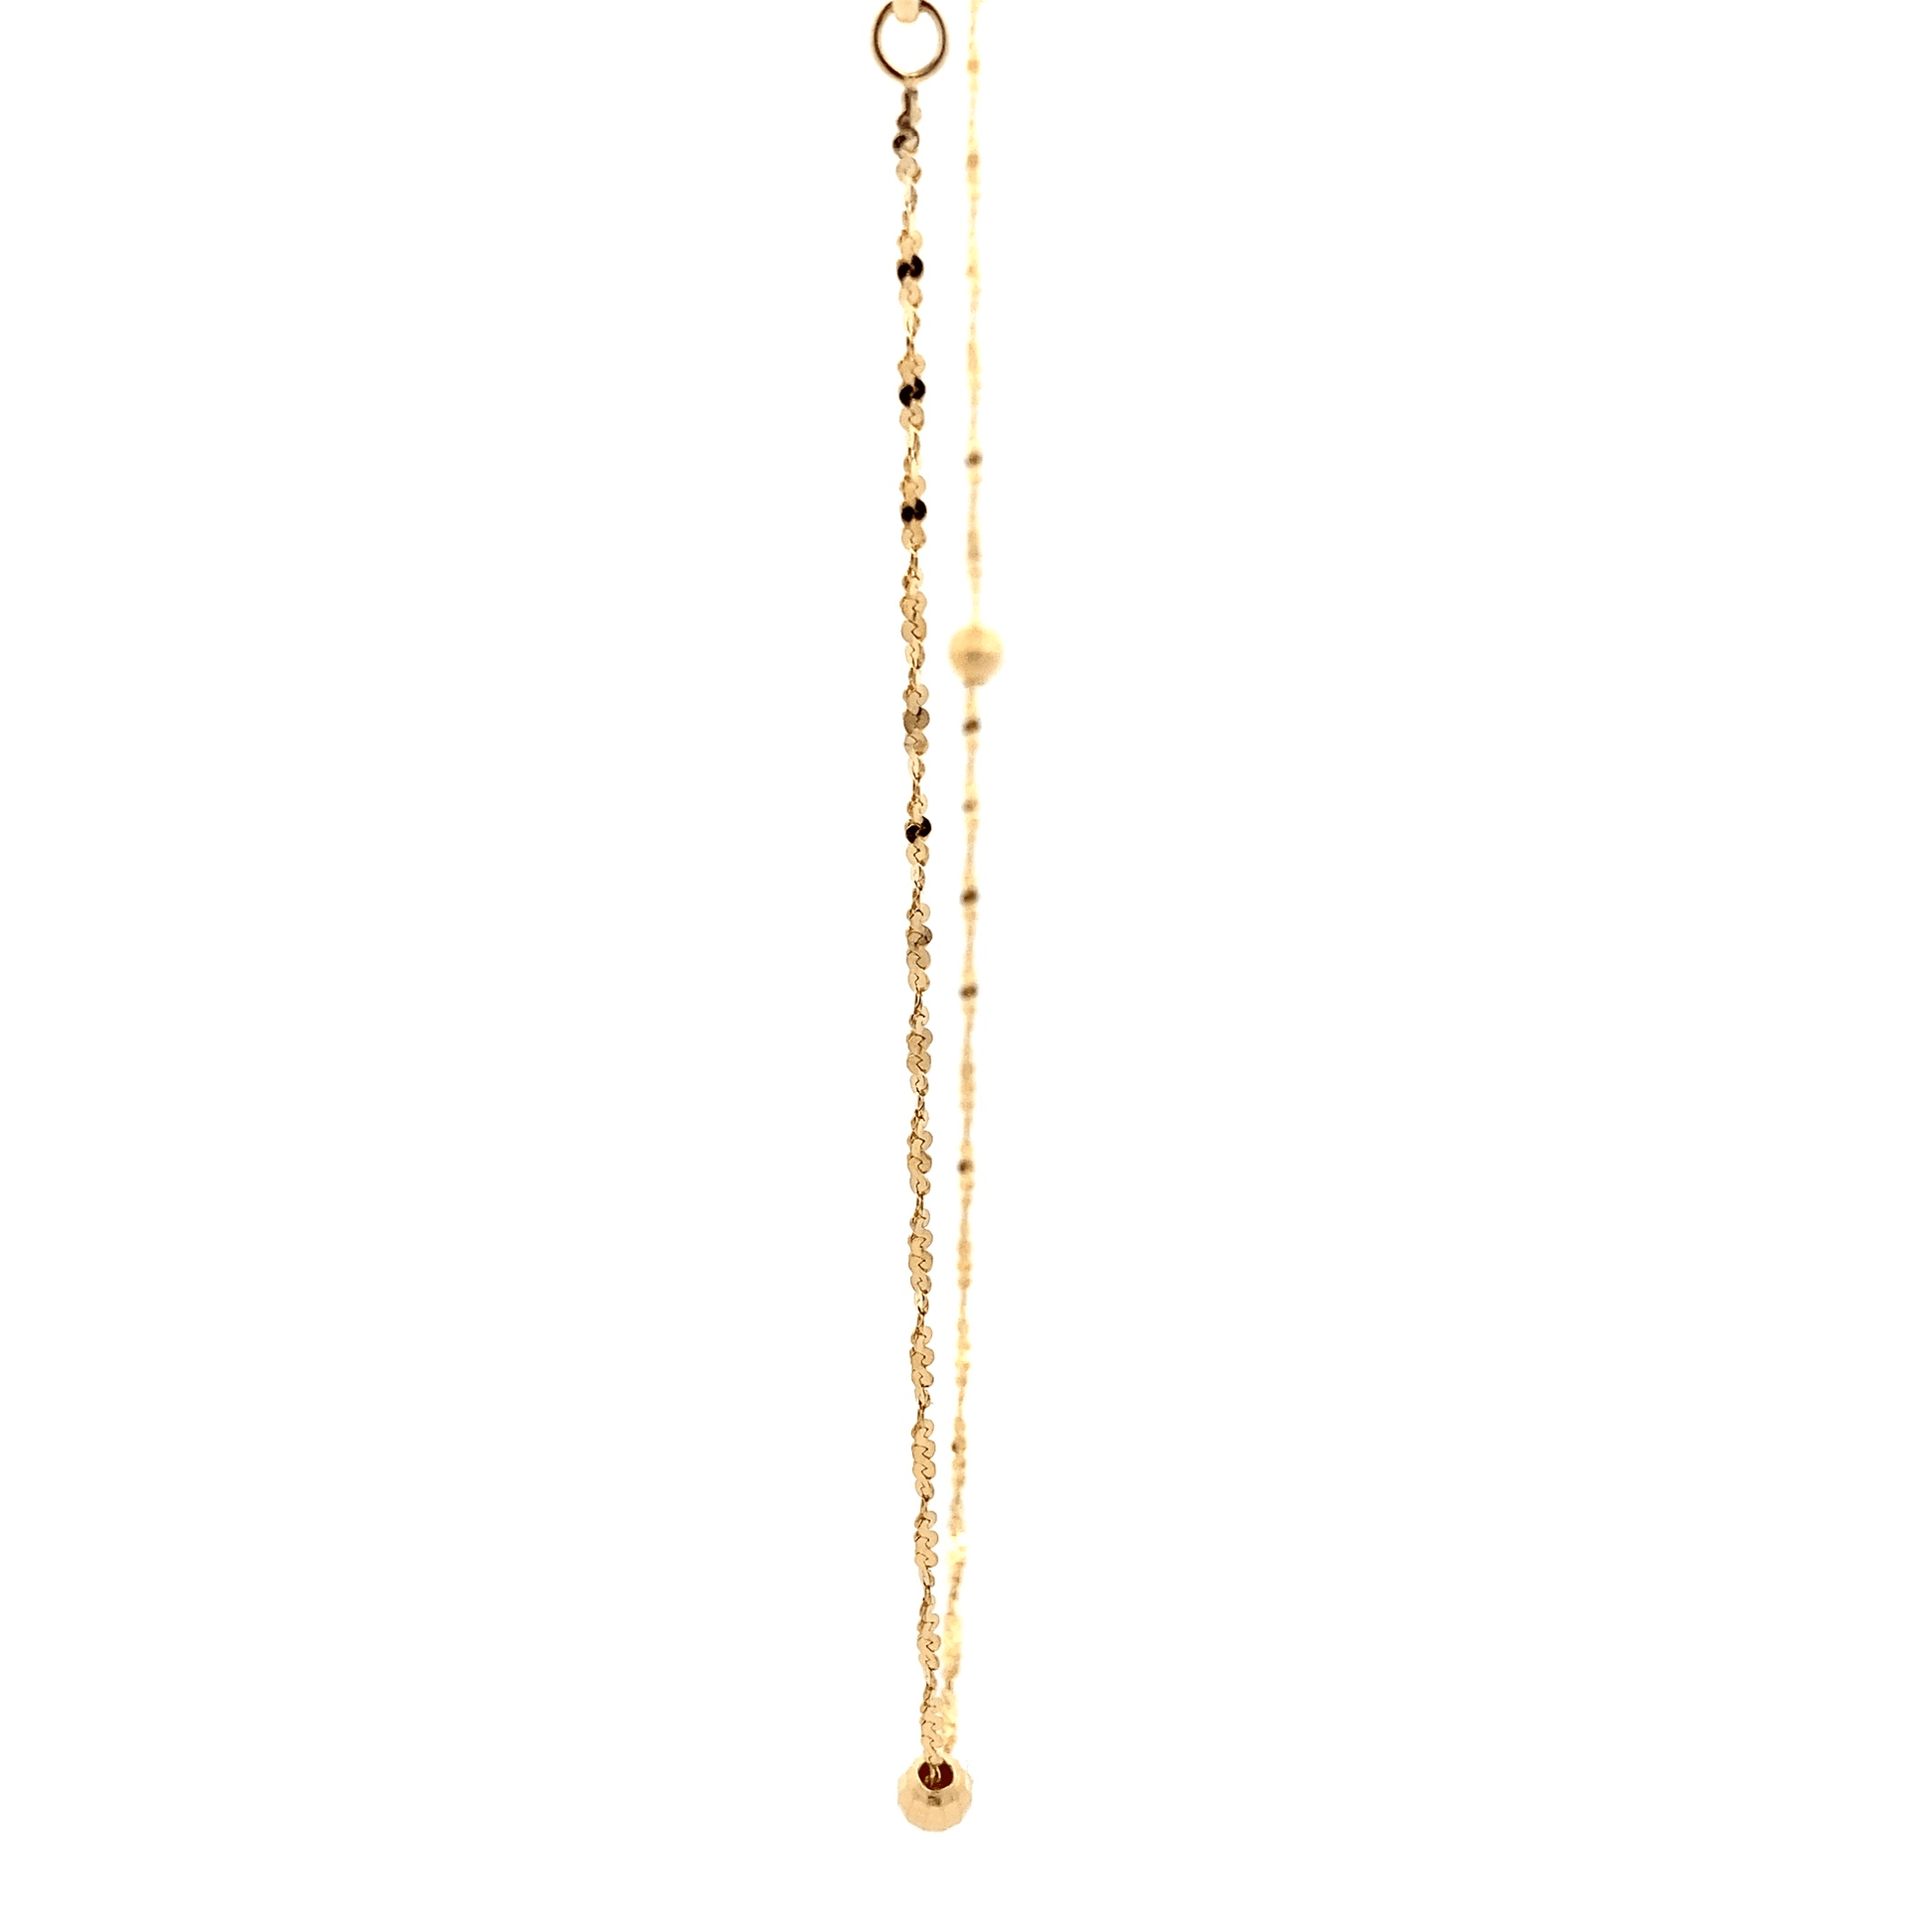 14K Yellow Gold 32" Beaded Twisted Serpentine Chain - ipawnishop.com